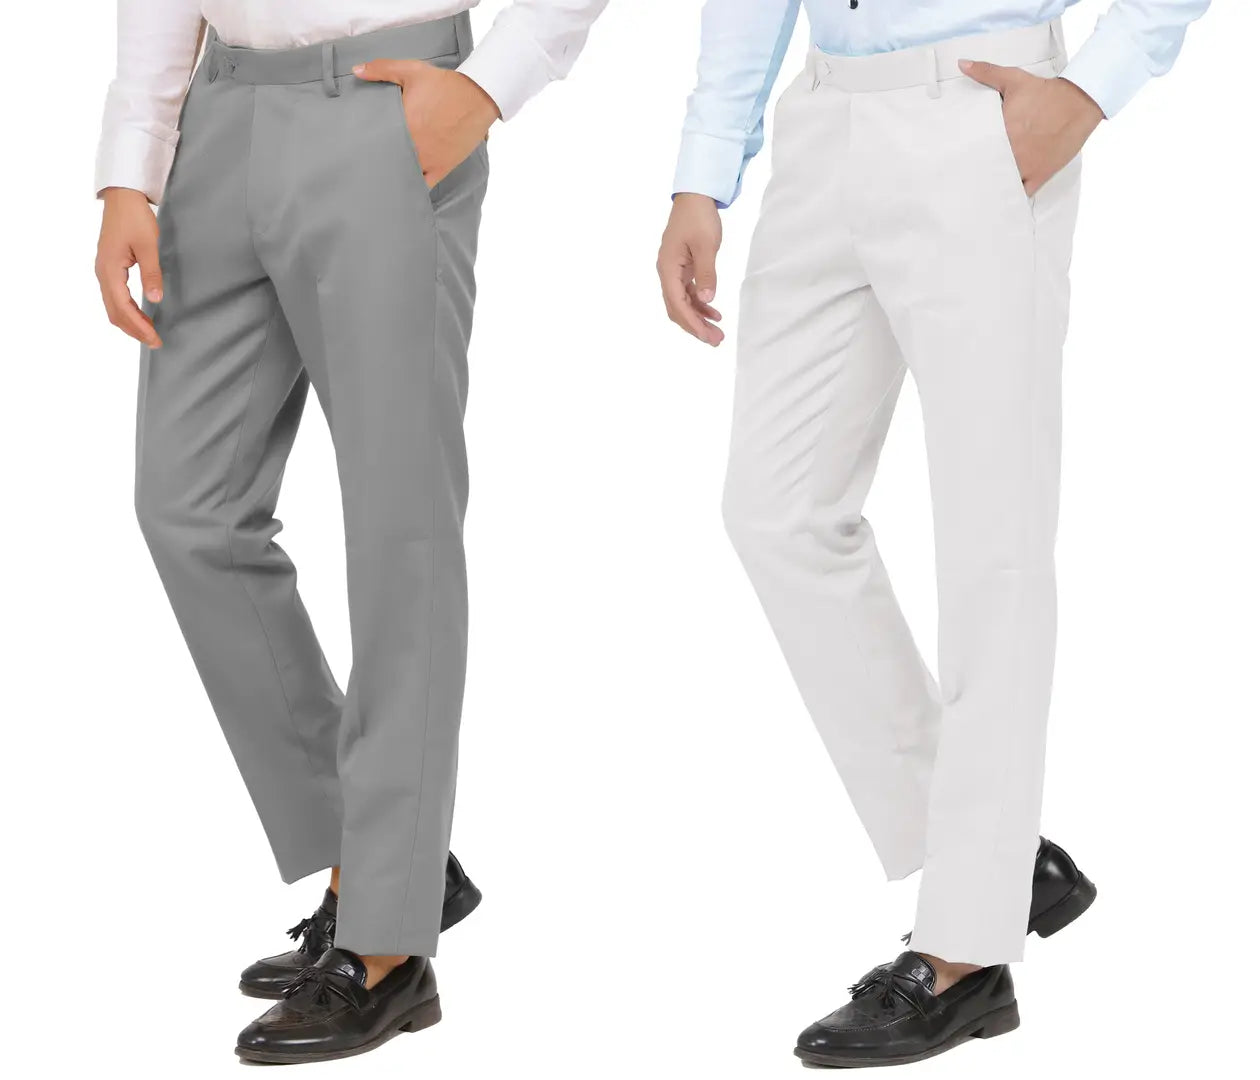 Kundan Men Poly-Viscose Blended Light Cot Grey and White Formal Trousers ( Pack of 2 Trousers )